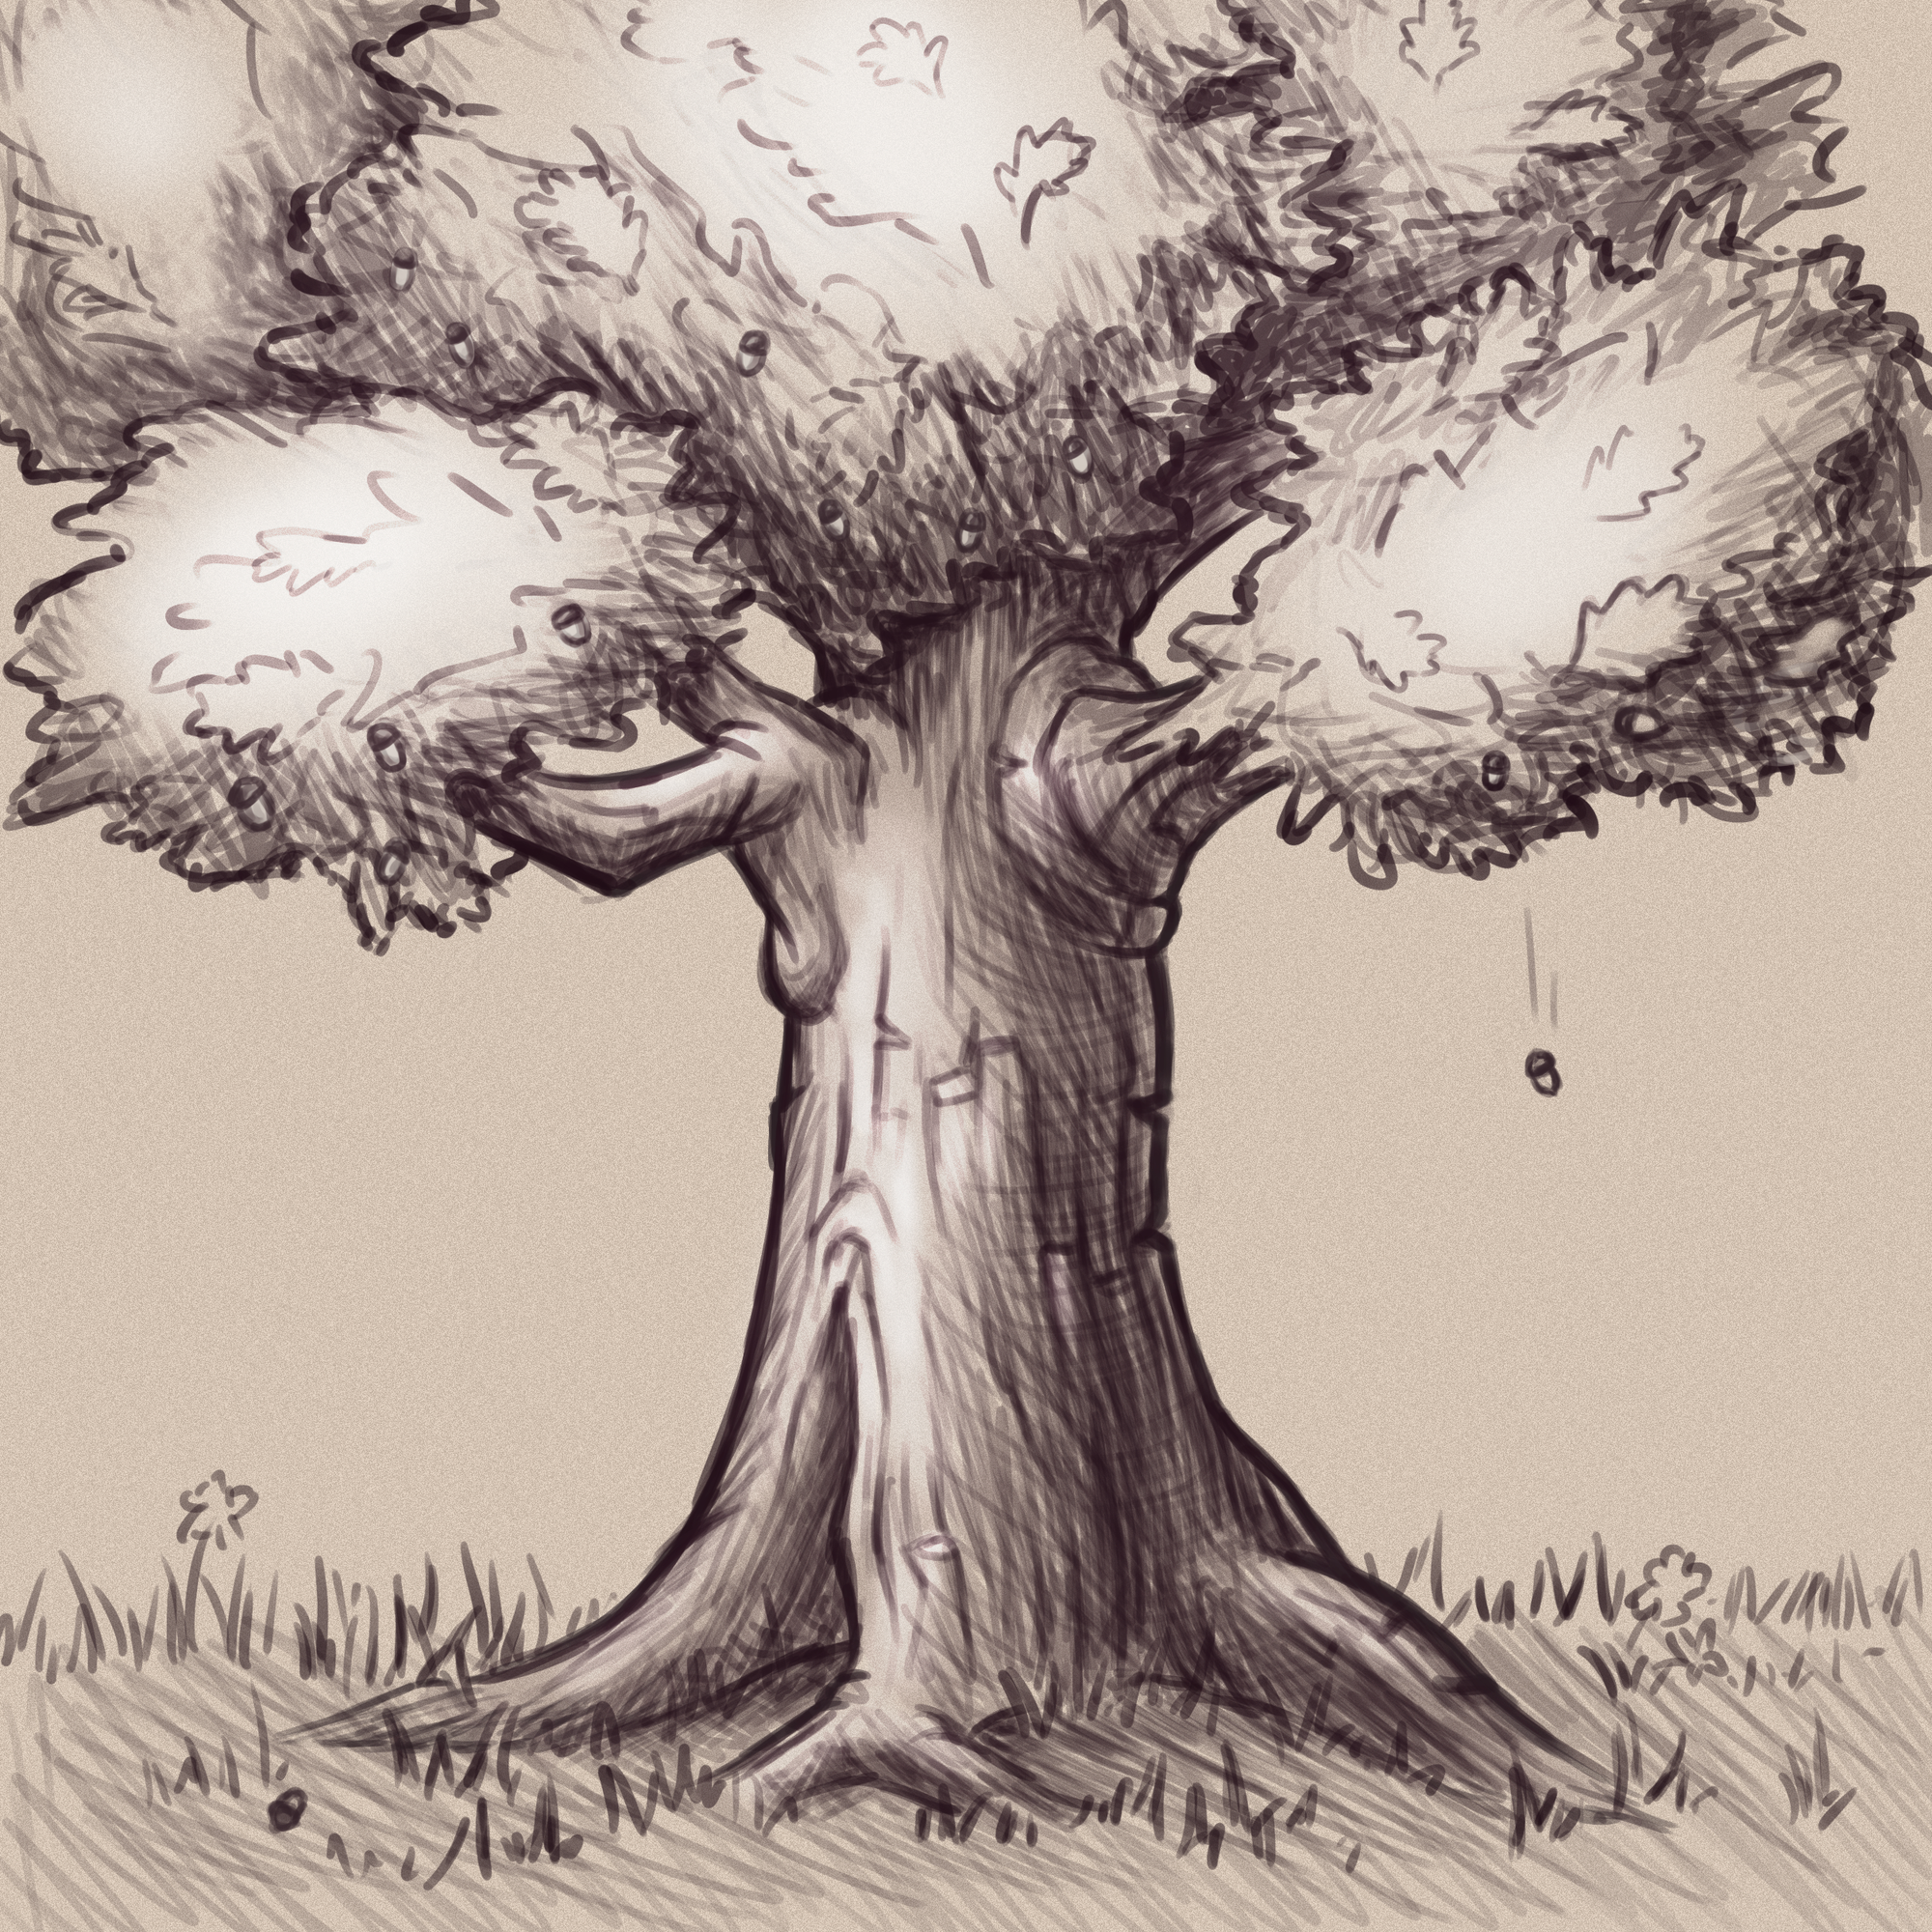 Greyscale sketch of a tree, healthy and free of wires.